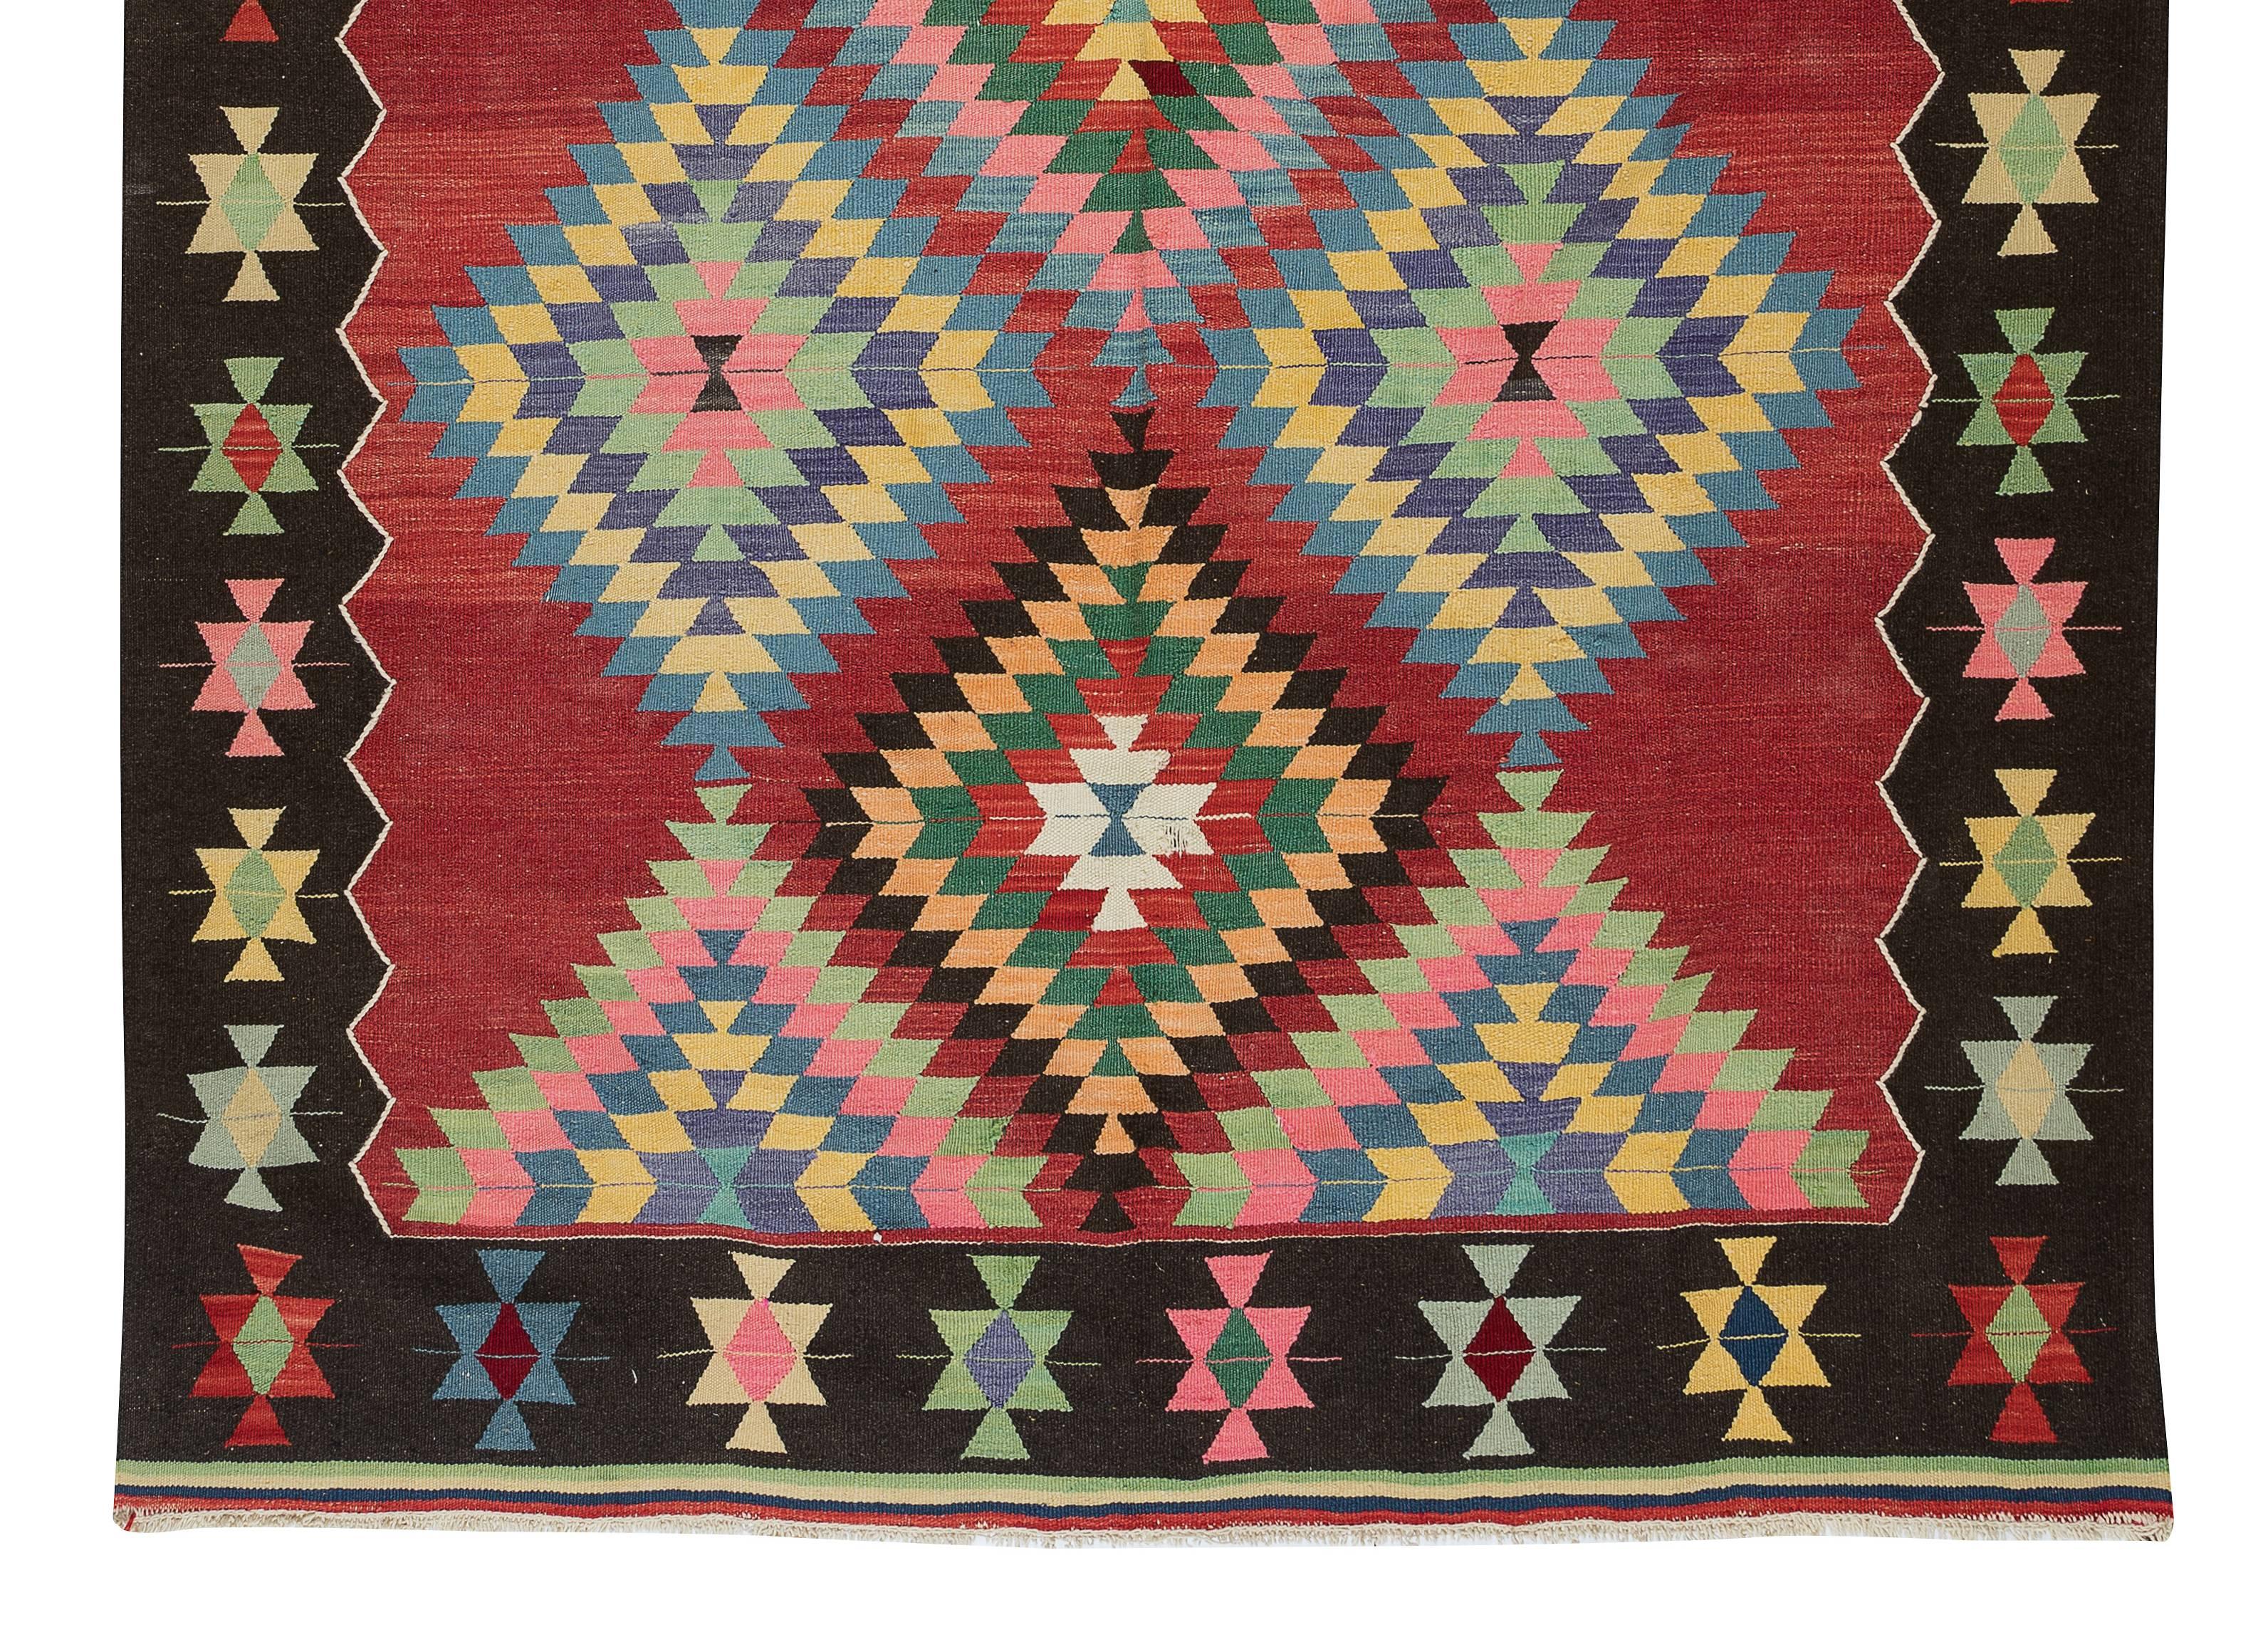 20th Century 6x8.7 Ft Colorful HandWoven Vintage Turkish Wool Kilim Rug with Geometric Design For Sale